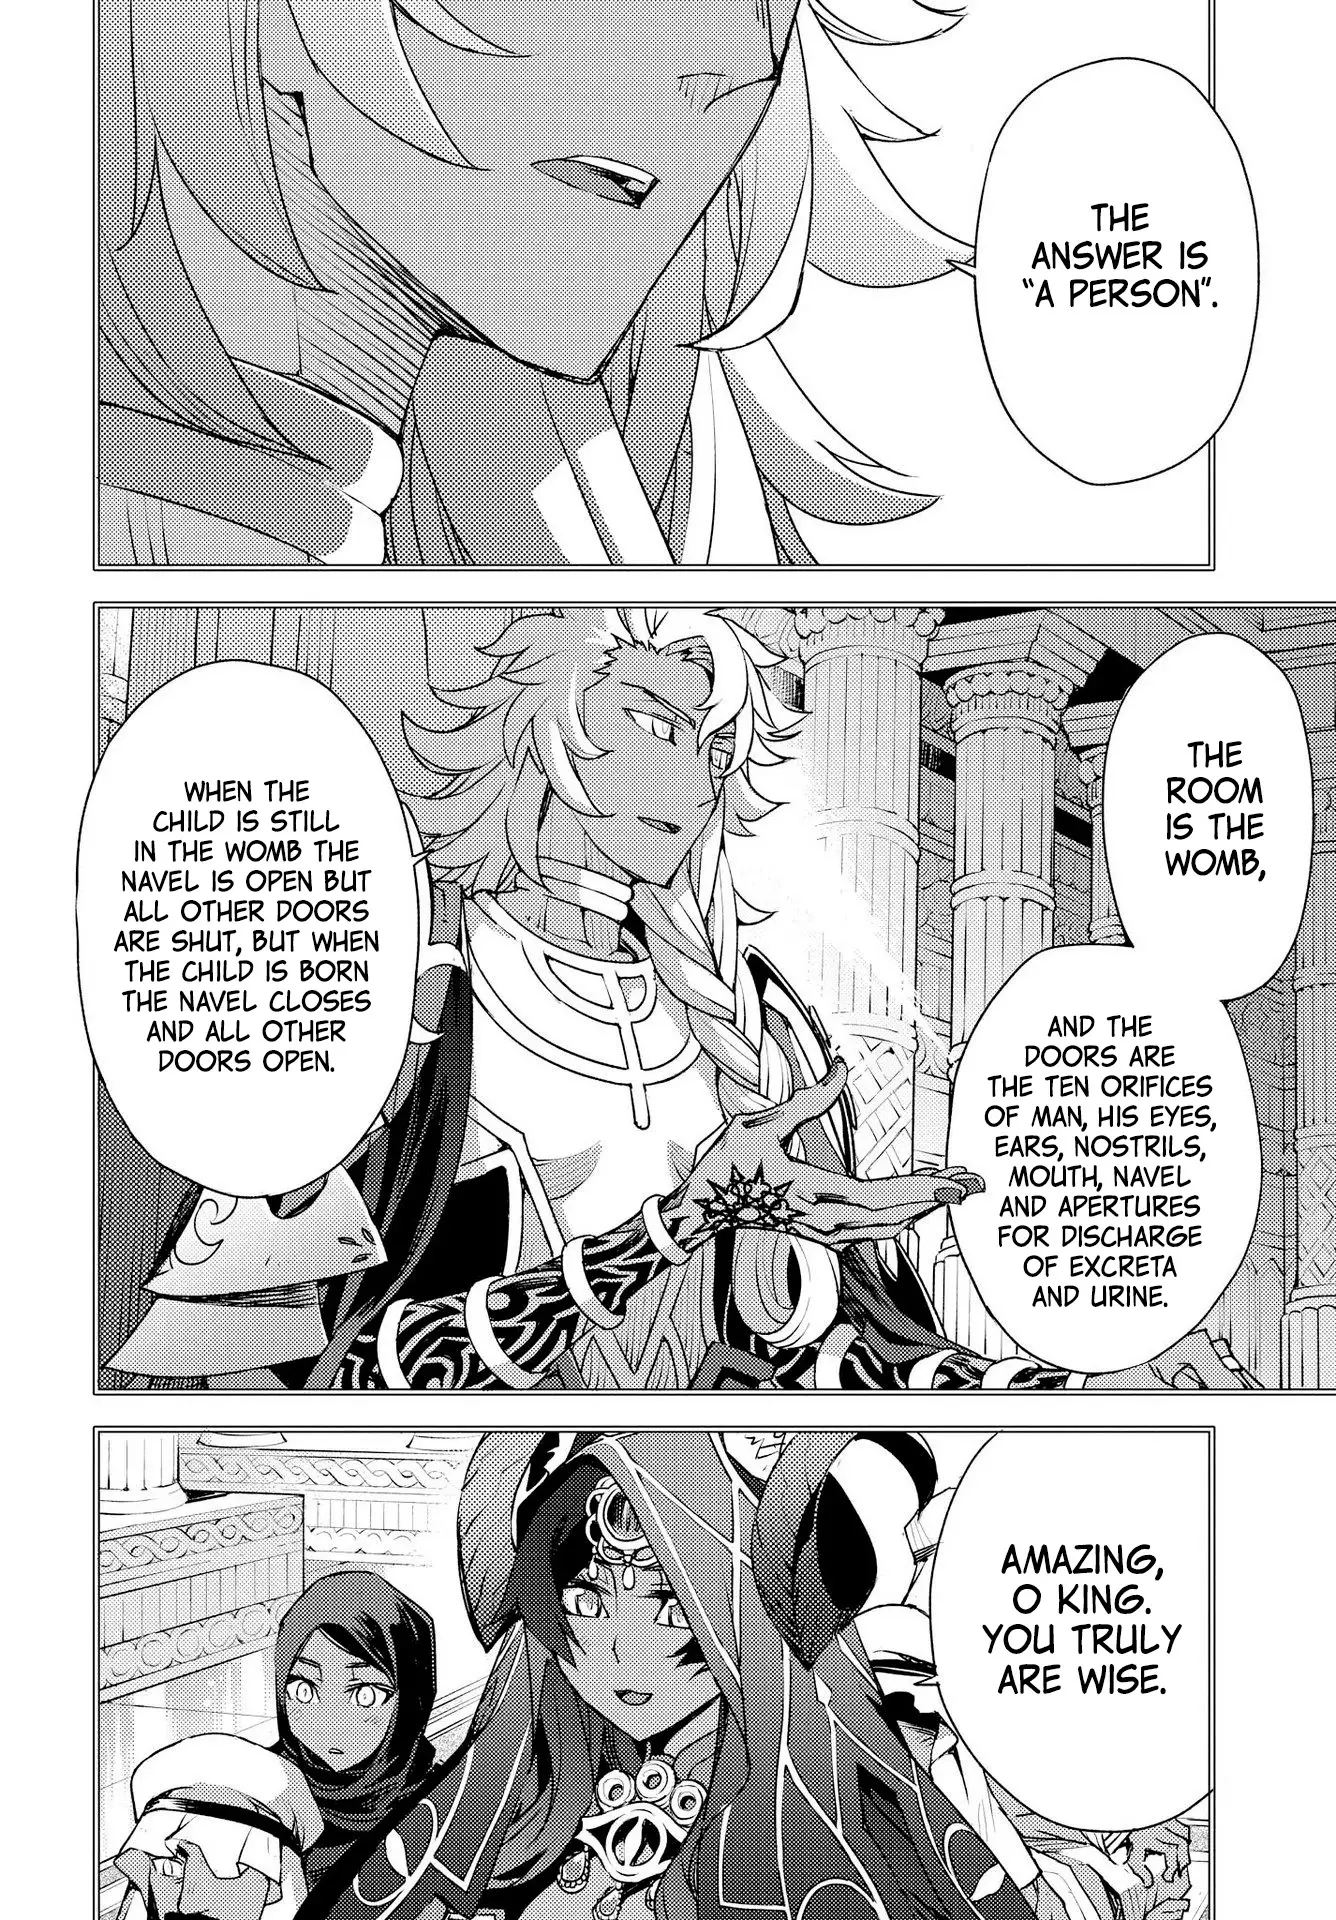 Fate/grand Order: Epic Of Remnant - Subspecies Singularity Iv: Taboo Advent Salem: Salem Of Heresy - 7 page 5